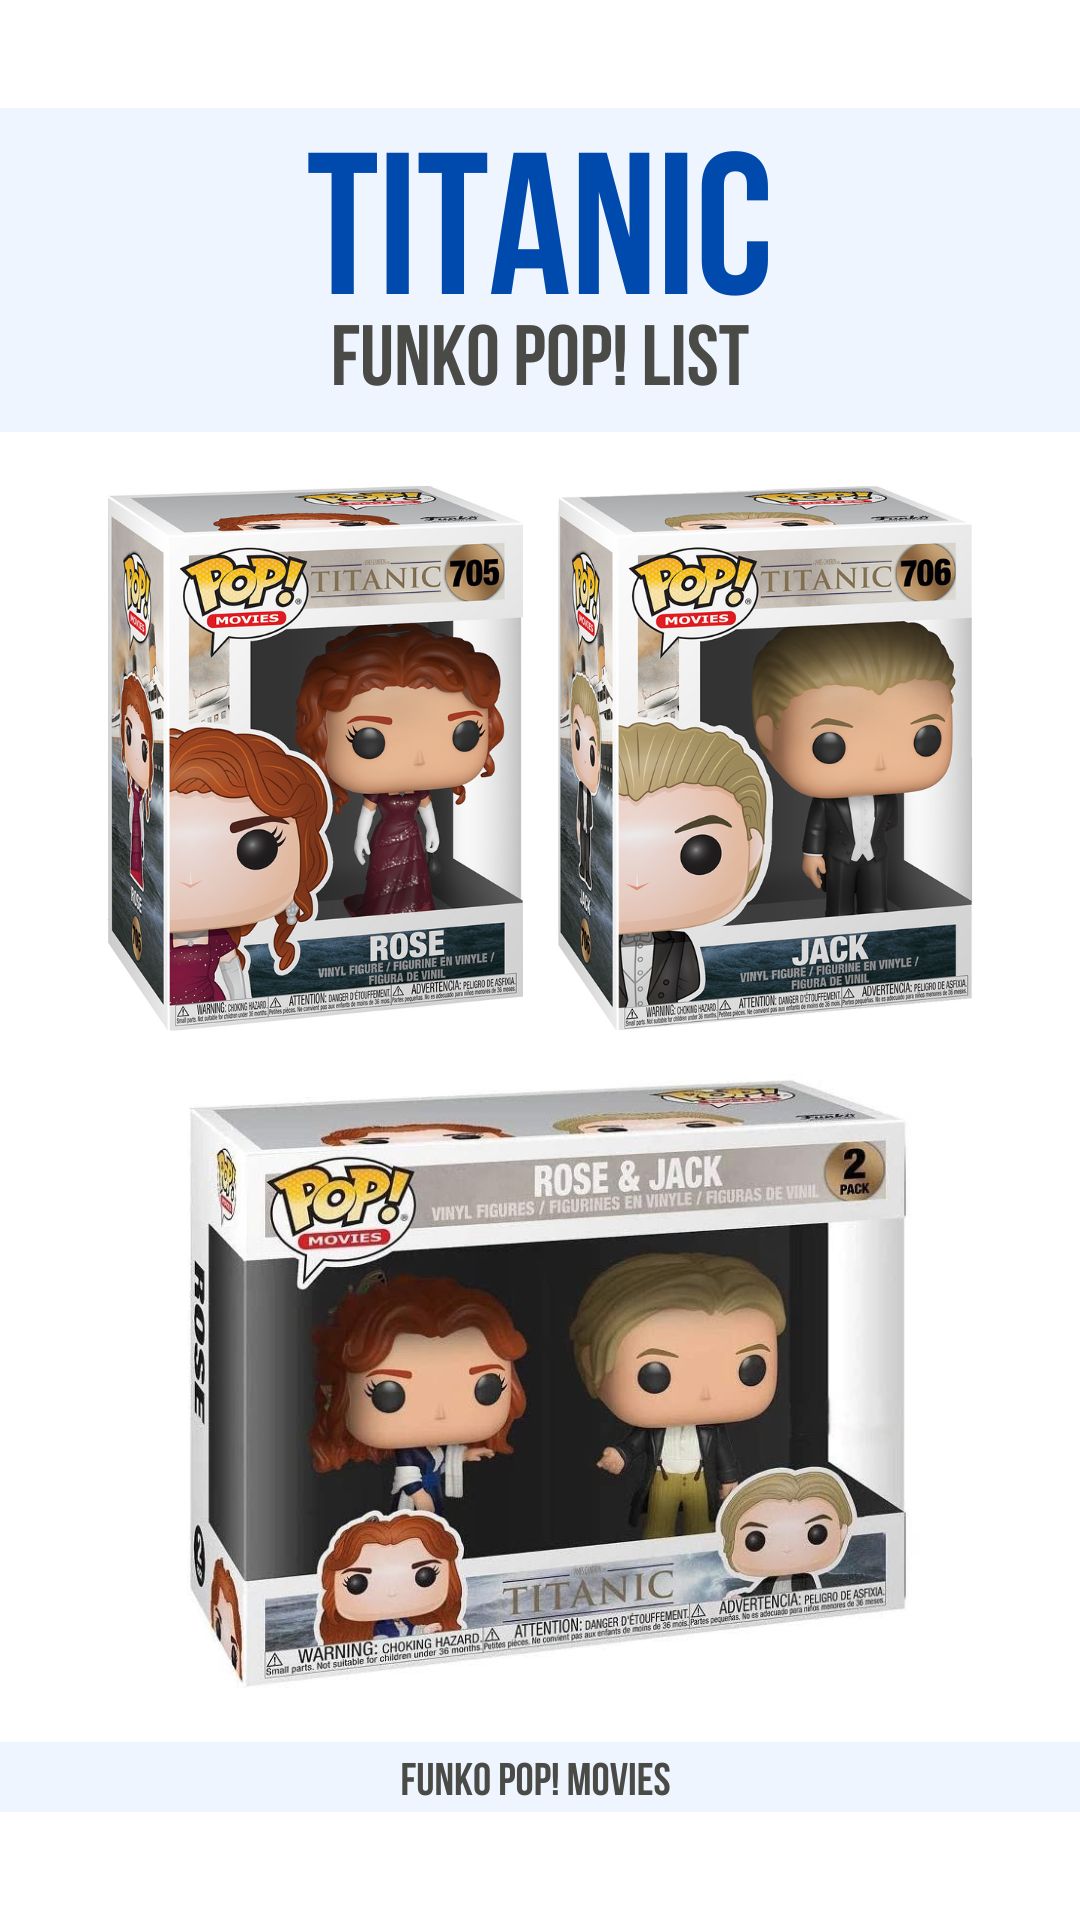 Titanic Funko Pop List of Figures with Boxes